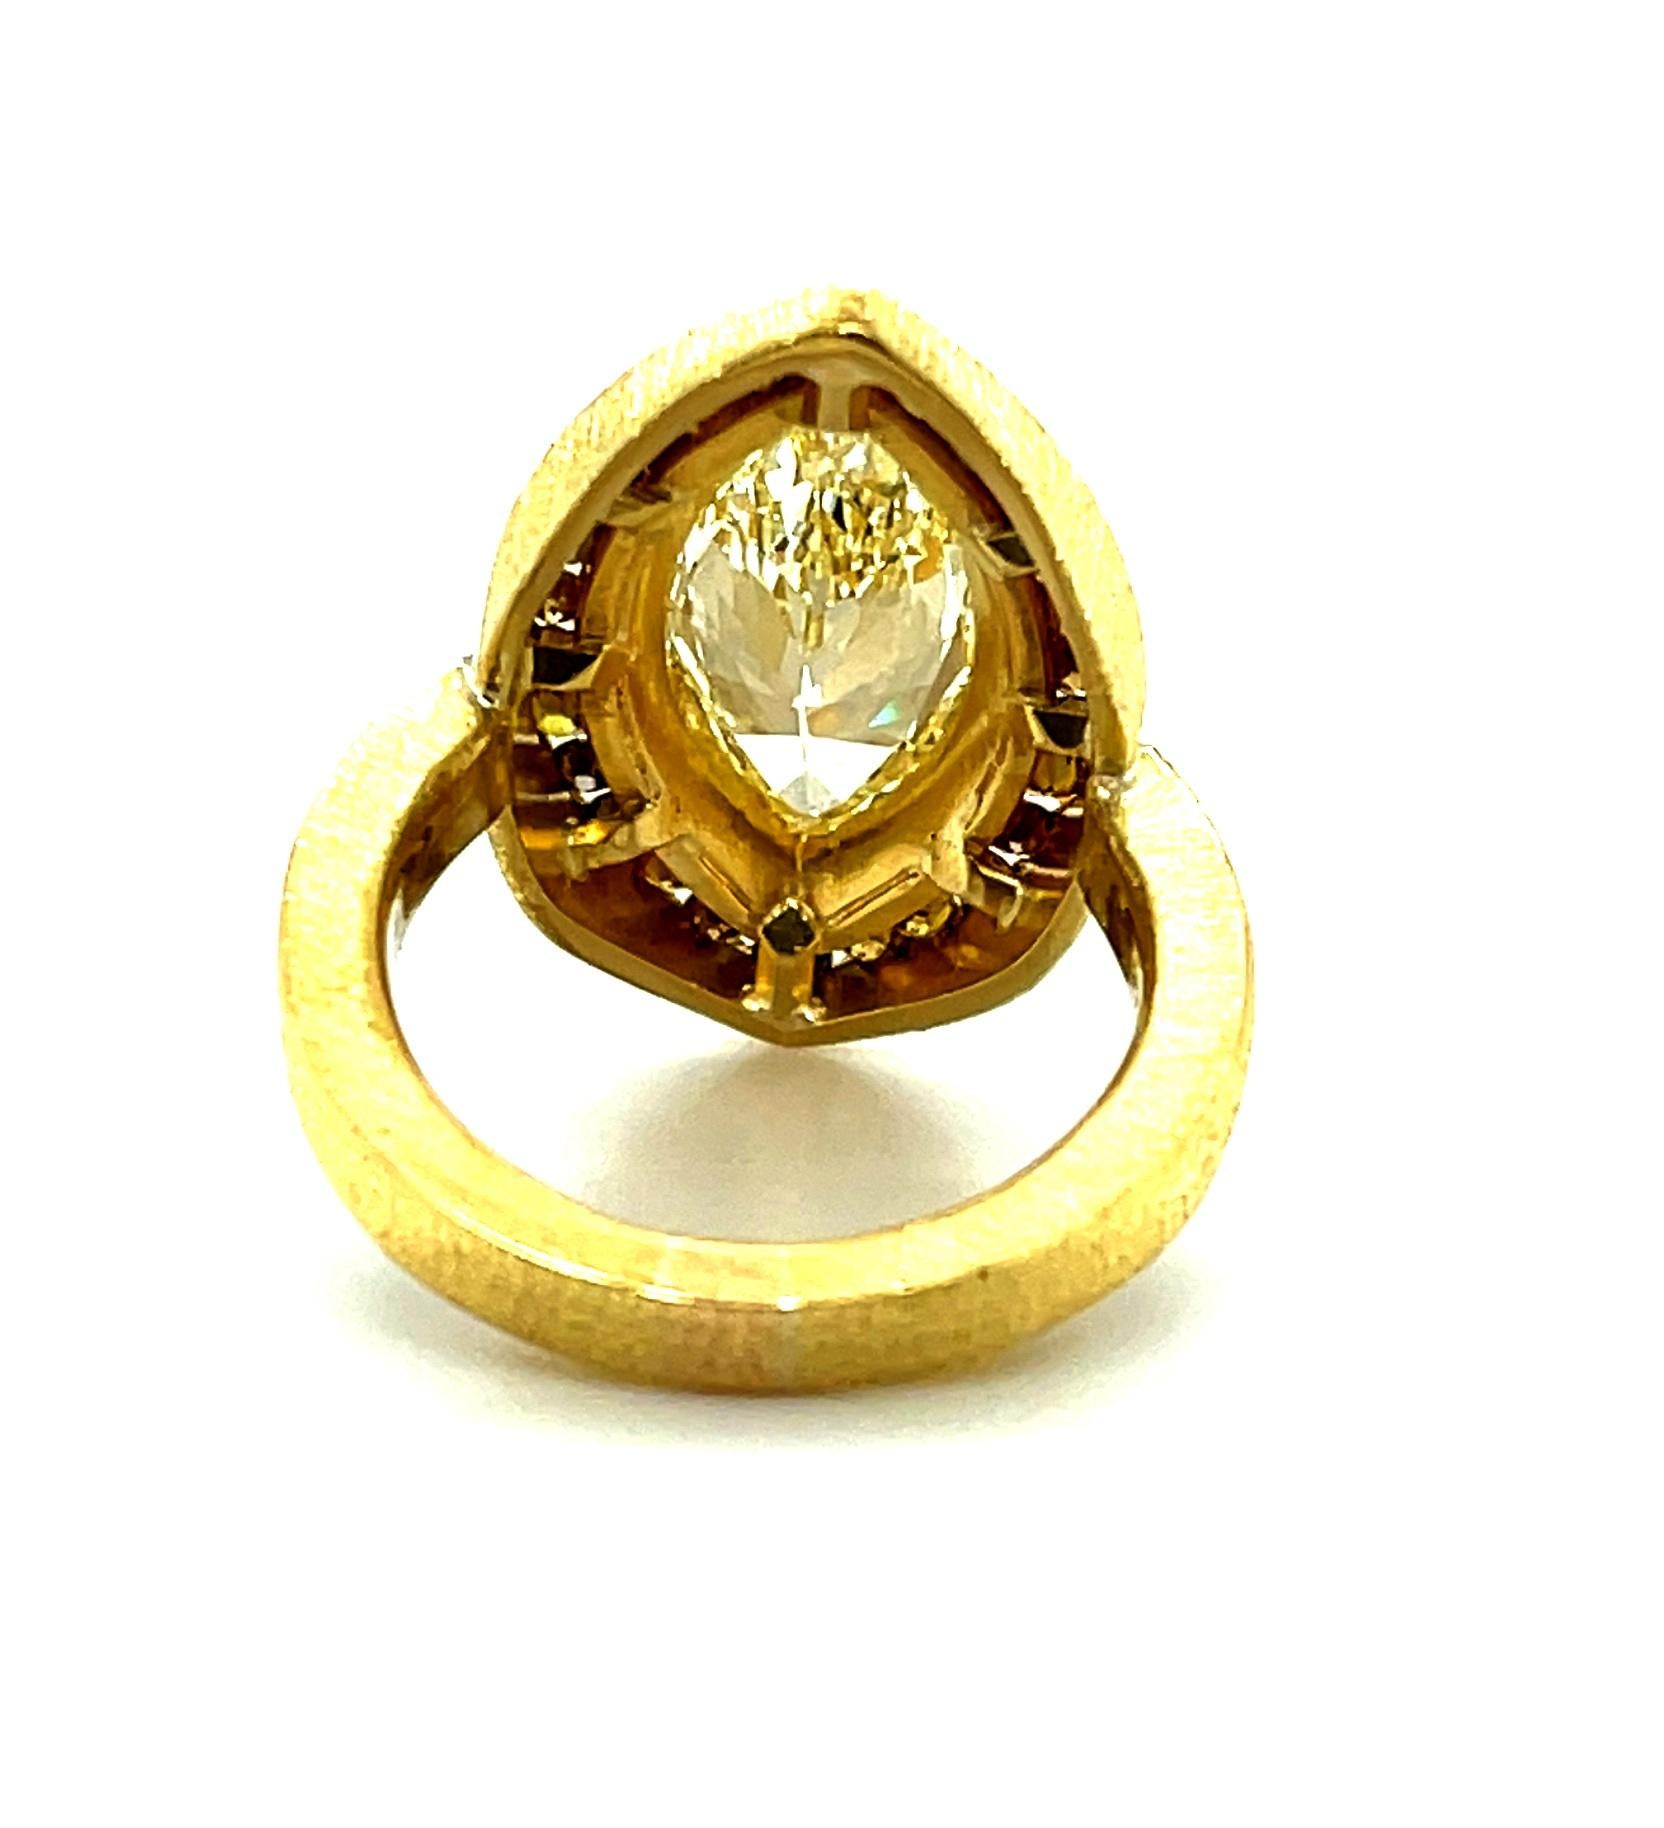 Marquise Cut 3.54 Carat Marquise Diamond Ring in 22K Yellow Gold with Fancy Colored Diamonds For Sale